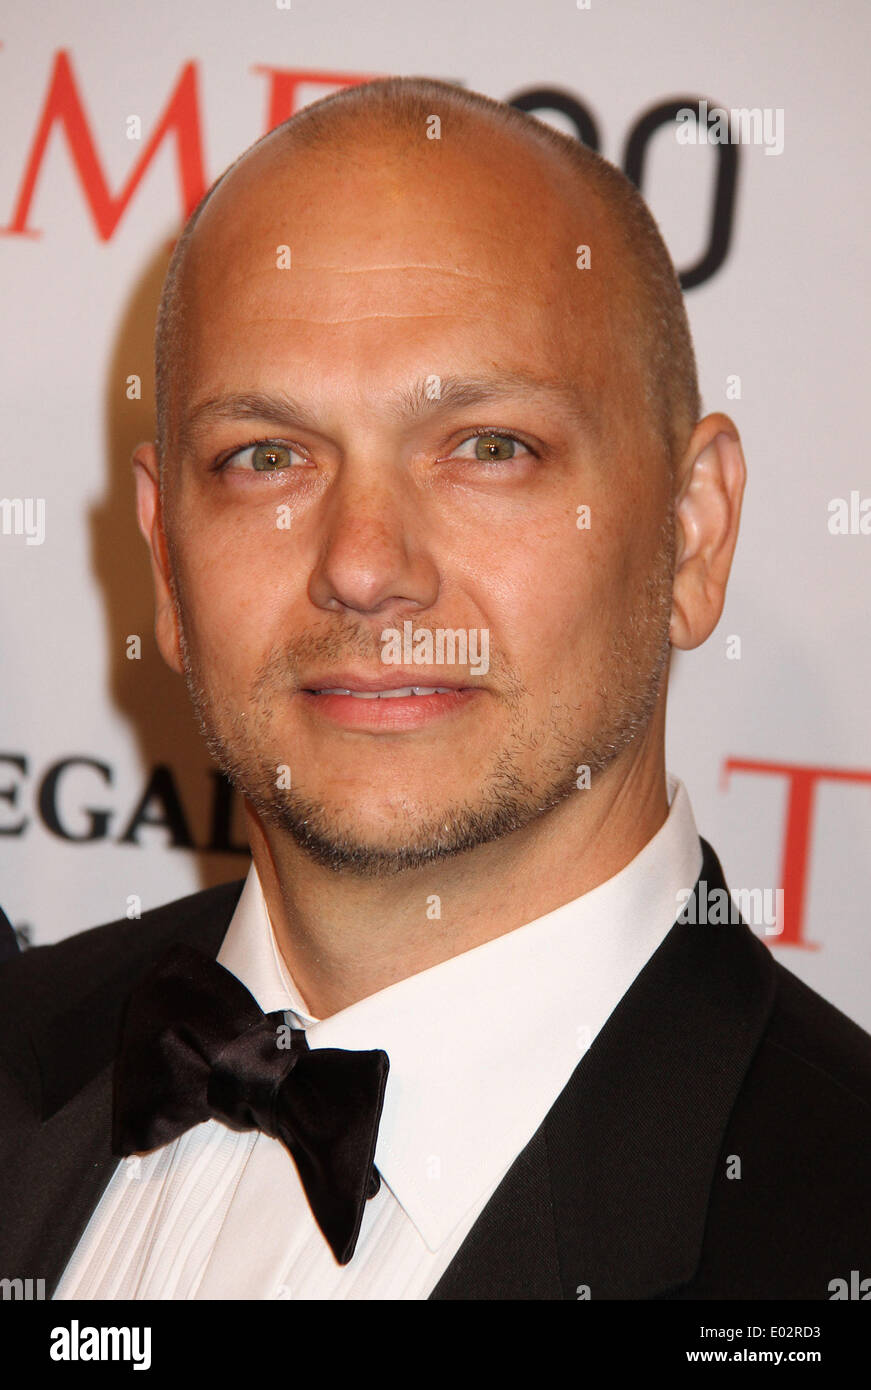 New York, New York, USA. 29th Apr, 2014. CEO of founder of Nest Labs TONY FADELL attends the 2014 Time 100 Gala held at the Time Warner Center. Credit:  Nancy Kaszerman/ZUMAPRESS.com/Alamy Live News Stock Photo